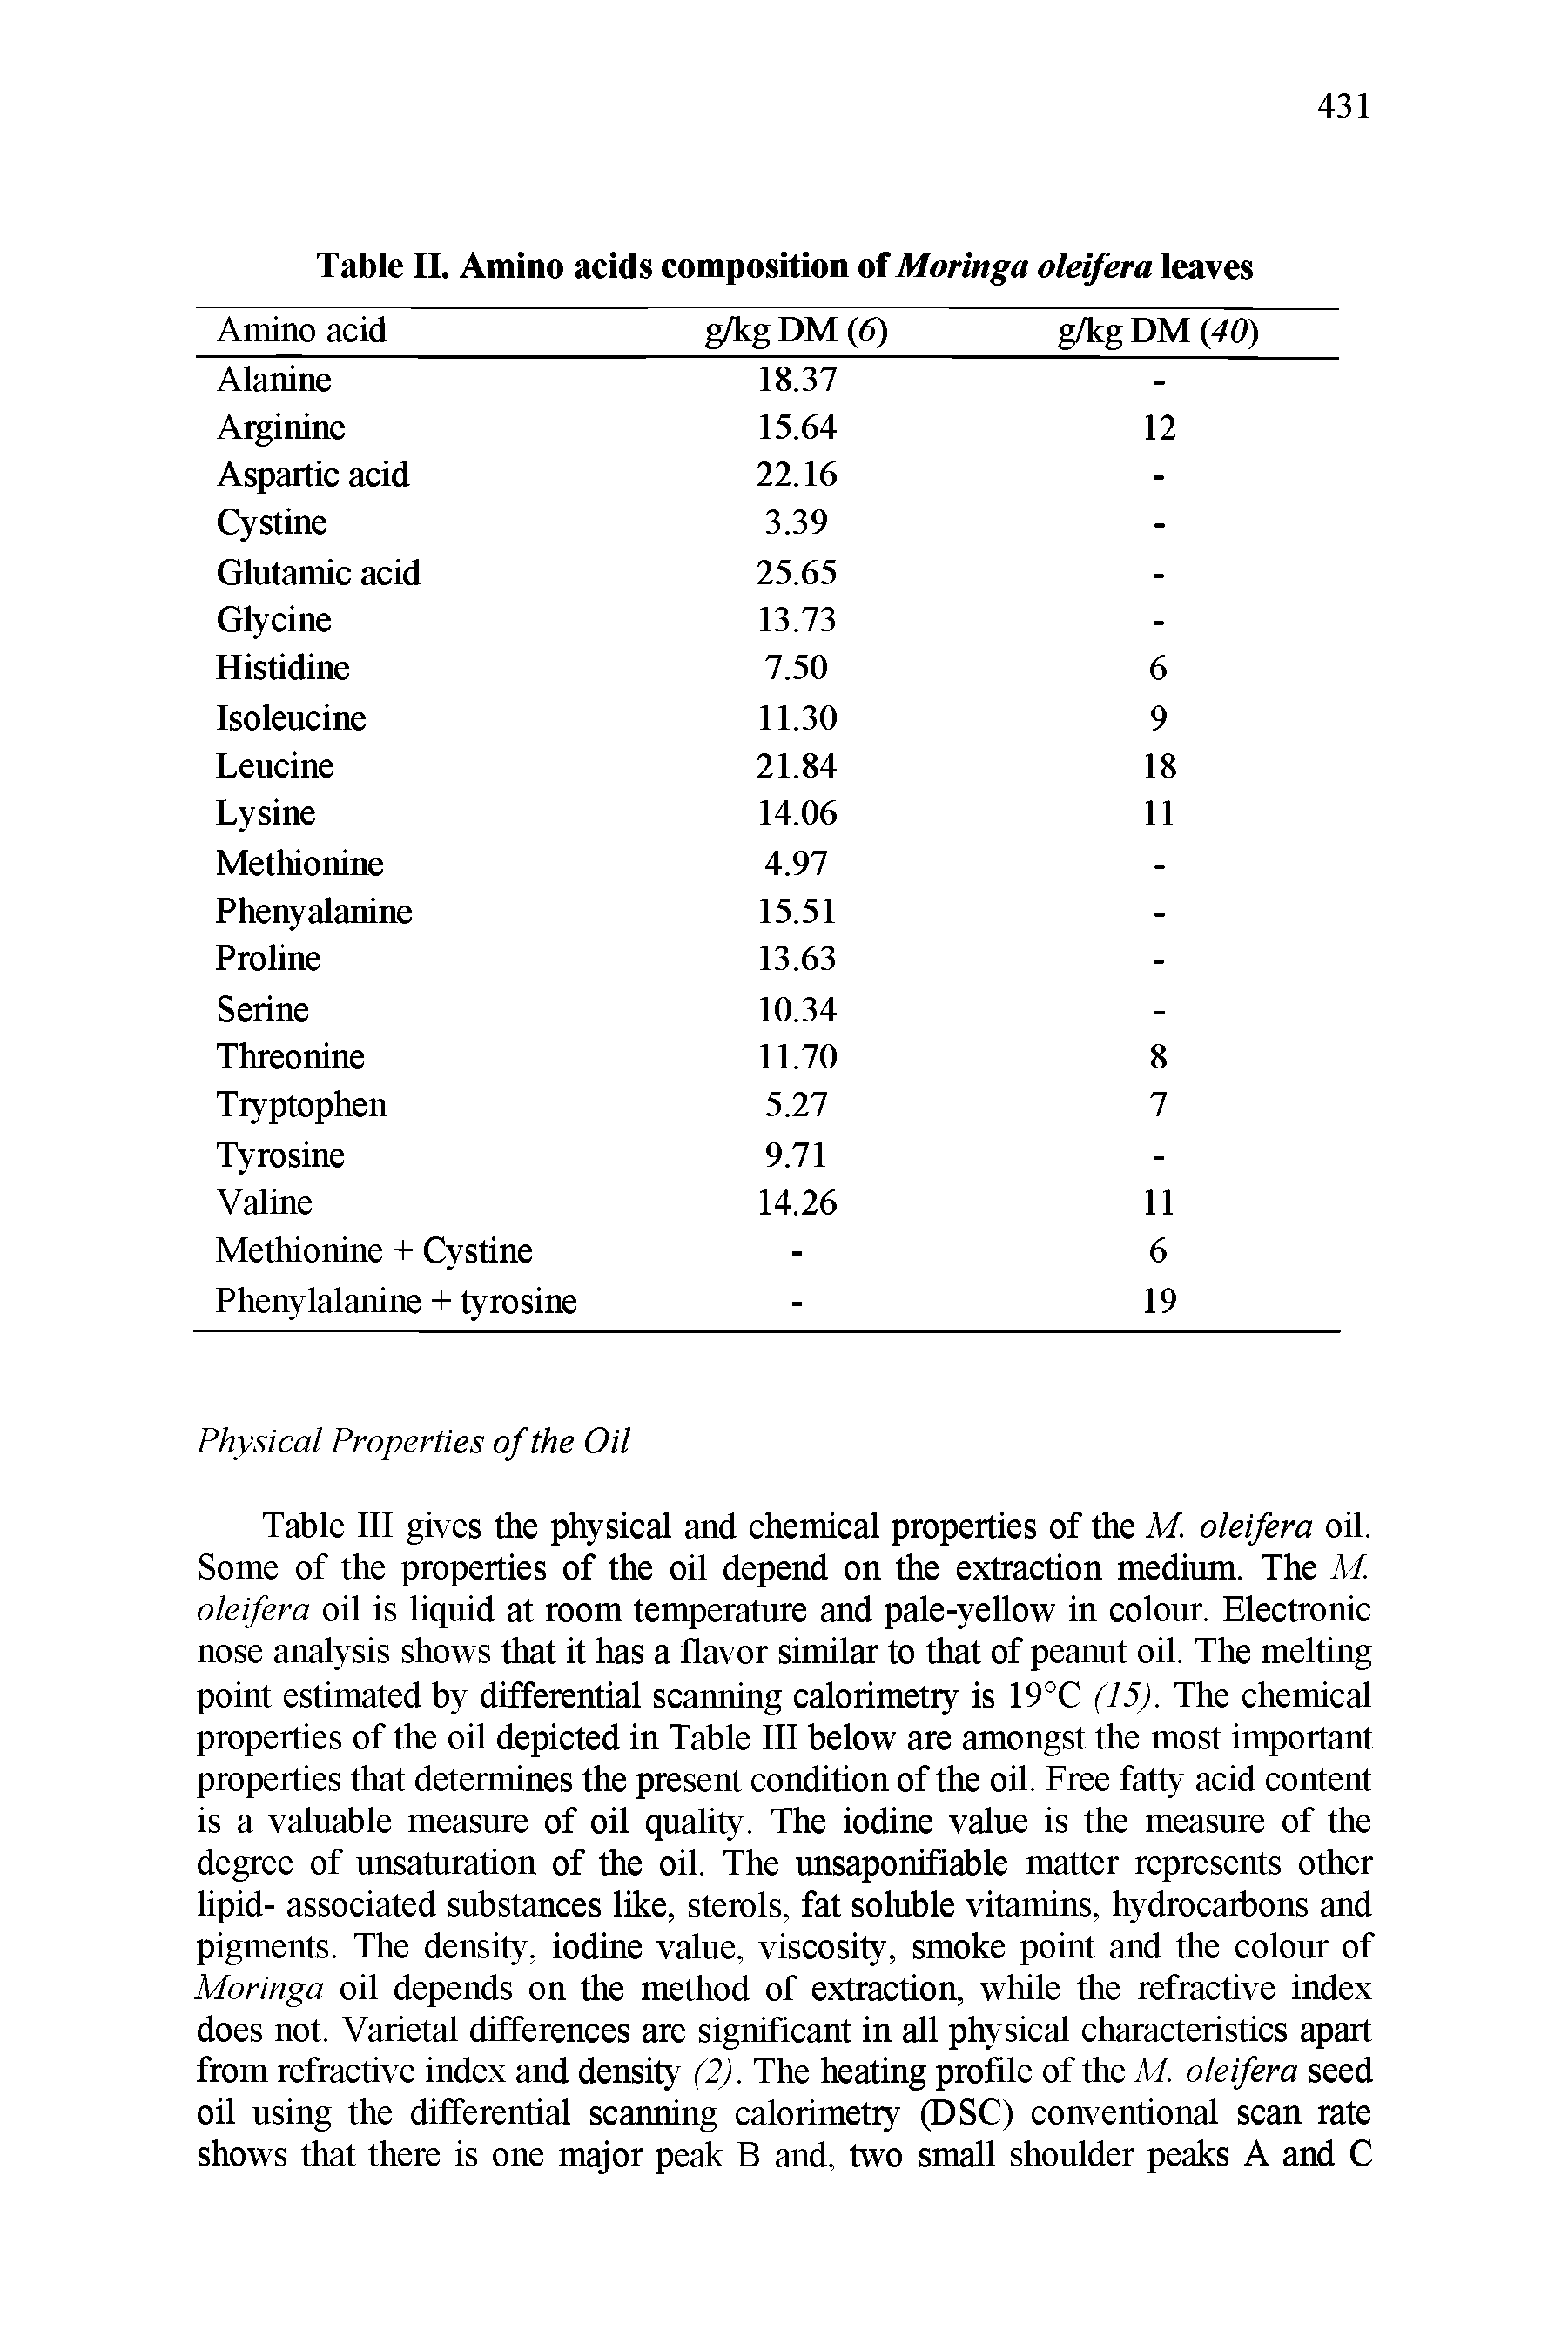 Table III gives the physical and chemical properties of the M. oleifera oil. Some of the properties of the oil depend on the extraction medium. The M oleifera oil is liquid at room temperature and pale-yellow in colour. Electronic nose analysis shows that it has a flavor similar to that of peanut oil. The melting point estimated by differential scanning calorimetry is 19°C (15). The chemical properties of the oil depicted in Table III below are amongst the most important properties that determines the present condition of the oil. Free fatty acid content is a valuable measure of oil quality. The iodine value is the measure of the degree of unsaturation of the oil. The unsaponifiable matter represents other lipid- associated substances like, sterols, fat soluble vitamins, hydrocarbons and pigments. The density, iodine value, viscosity, smoke point and the colour of Moringa oil depends on the method of extraction, while the refractive index does not. Varietal differences are significant in all physical characteristics apart from refractive index and density (2). The heating profile of the M. oleifera seed oil using the differential scanning calorimetry (DSC) conventional scan rate shows that there is one major peak B and, two small shoulder peaks A and C...